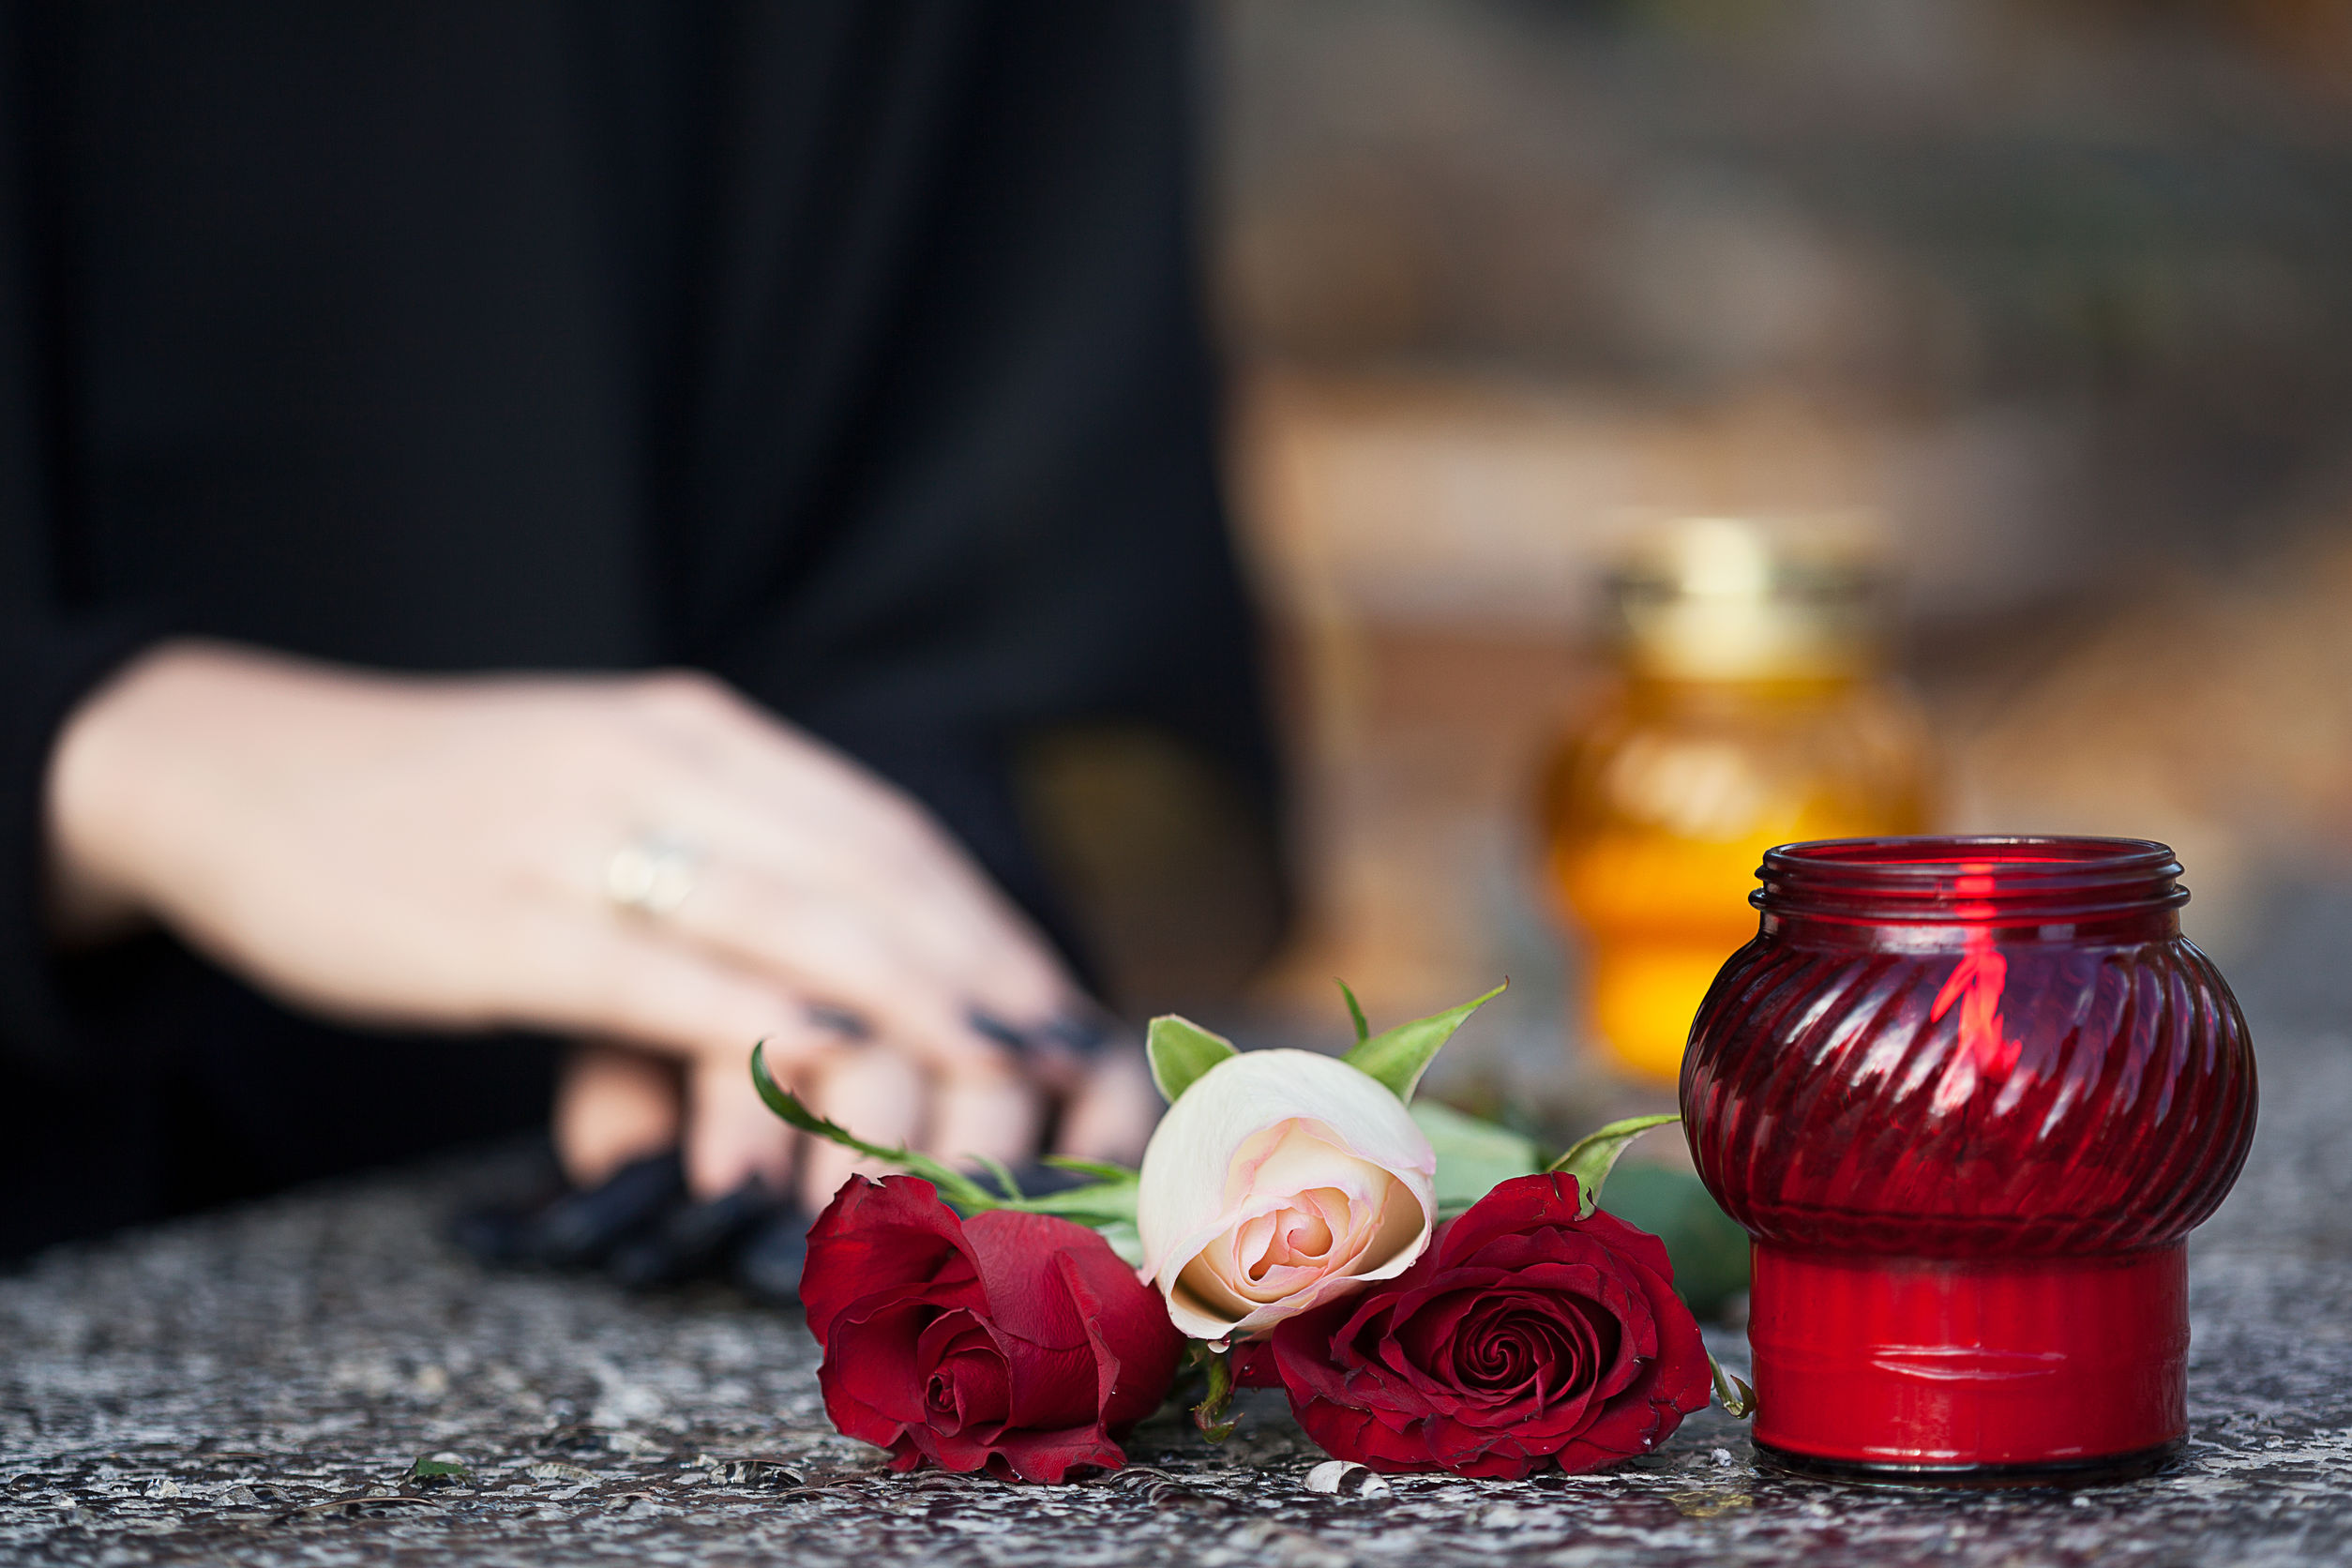 South Florida Funeral Home Negligence Attorneys